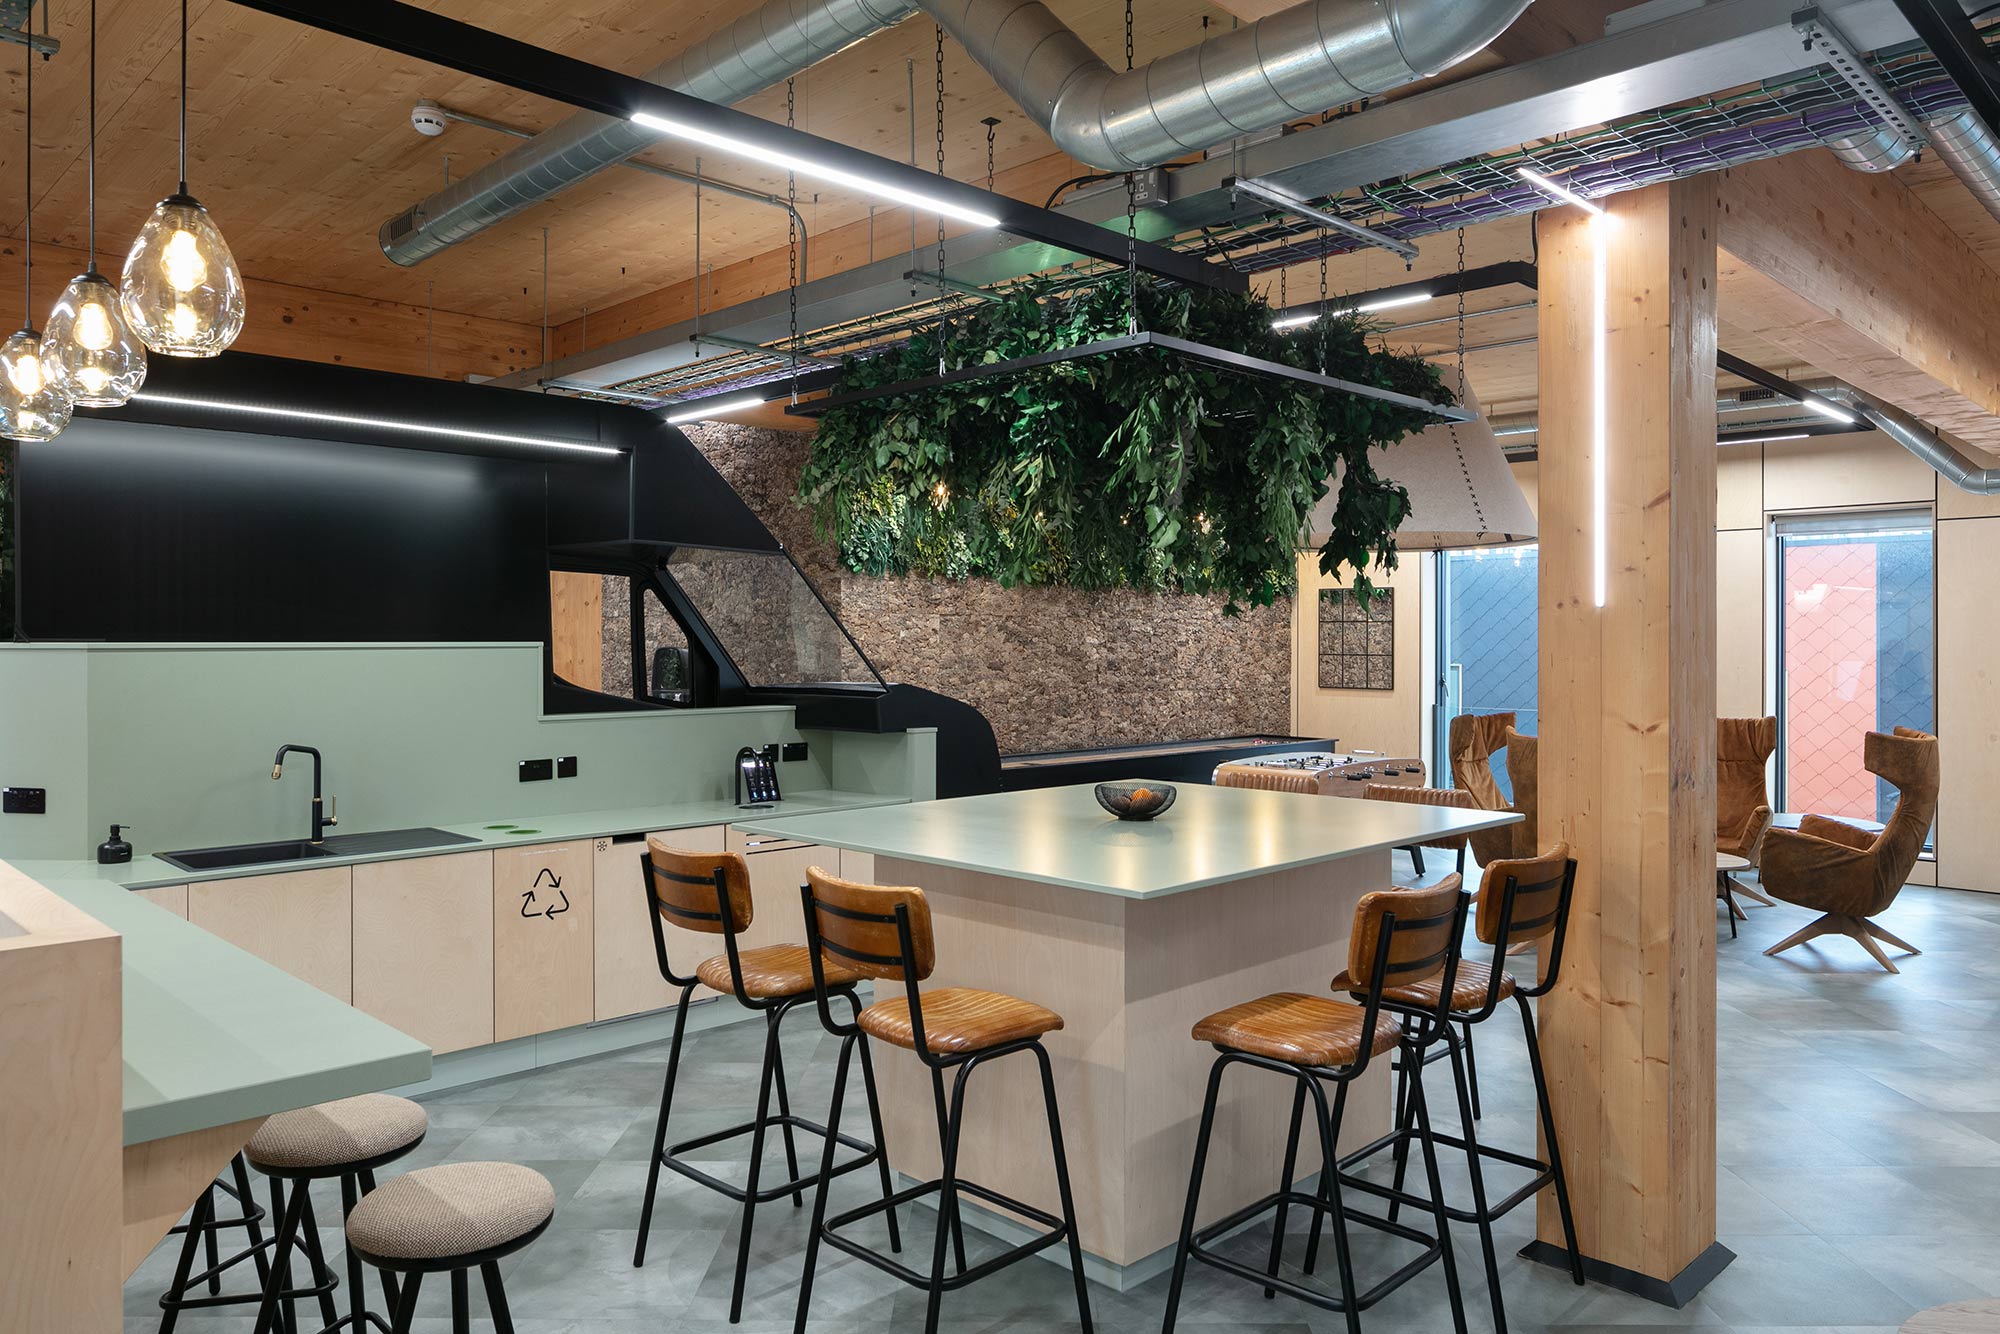 Image of 6 Yorkshire Housing 3Z7A0286 in The Pheasantry Café in Bushy Park, London, gets a facelift with the help of Cosentino - Cosentino